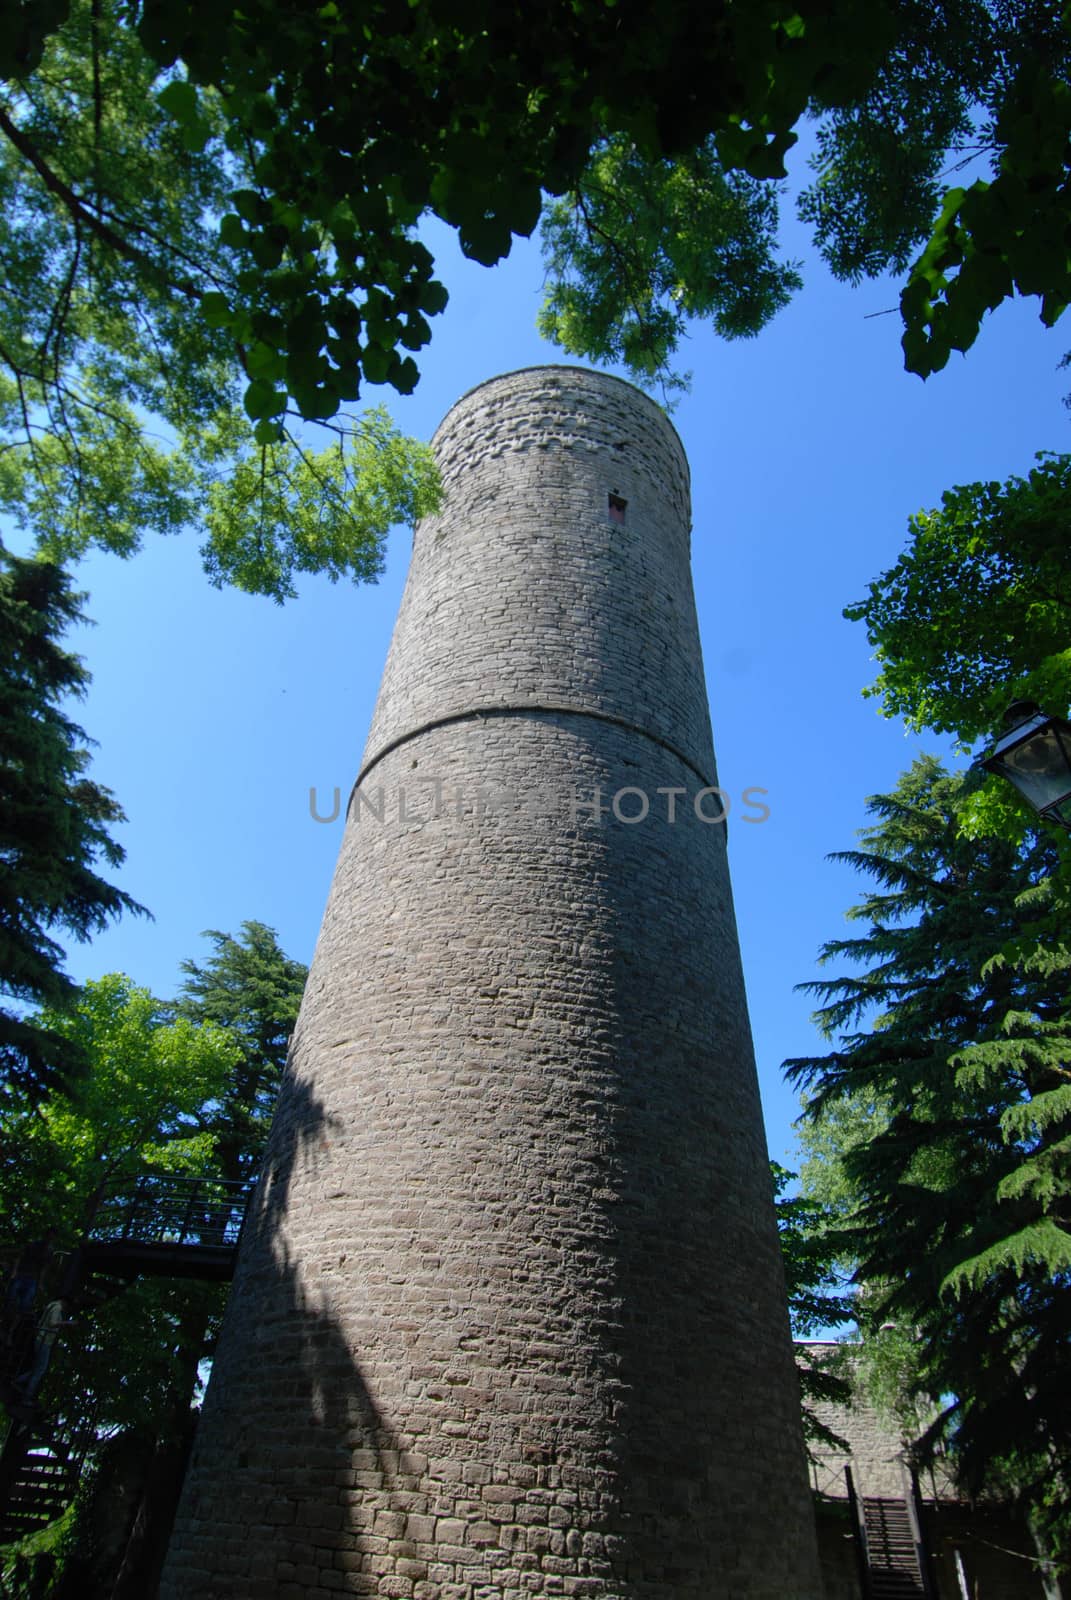 Tower of Roccaverano by cosca